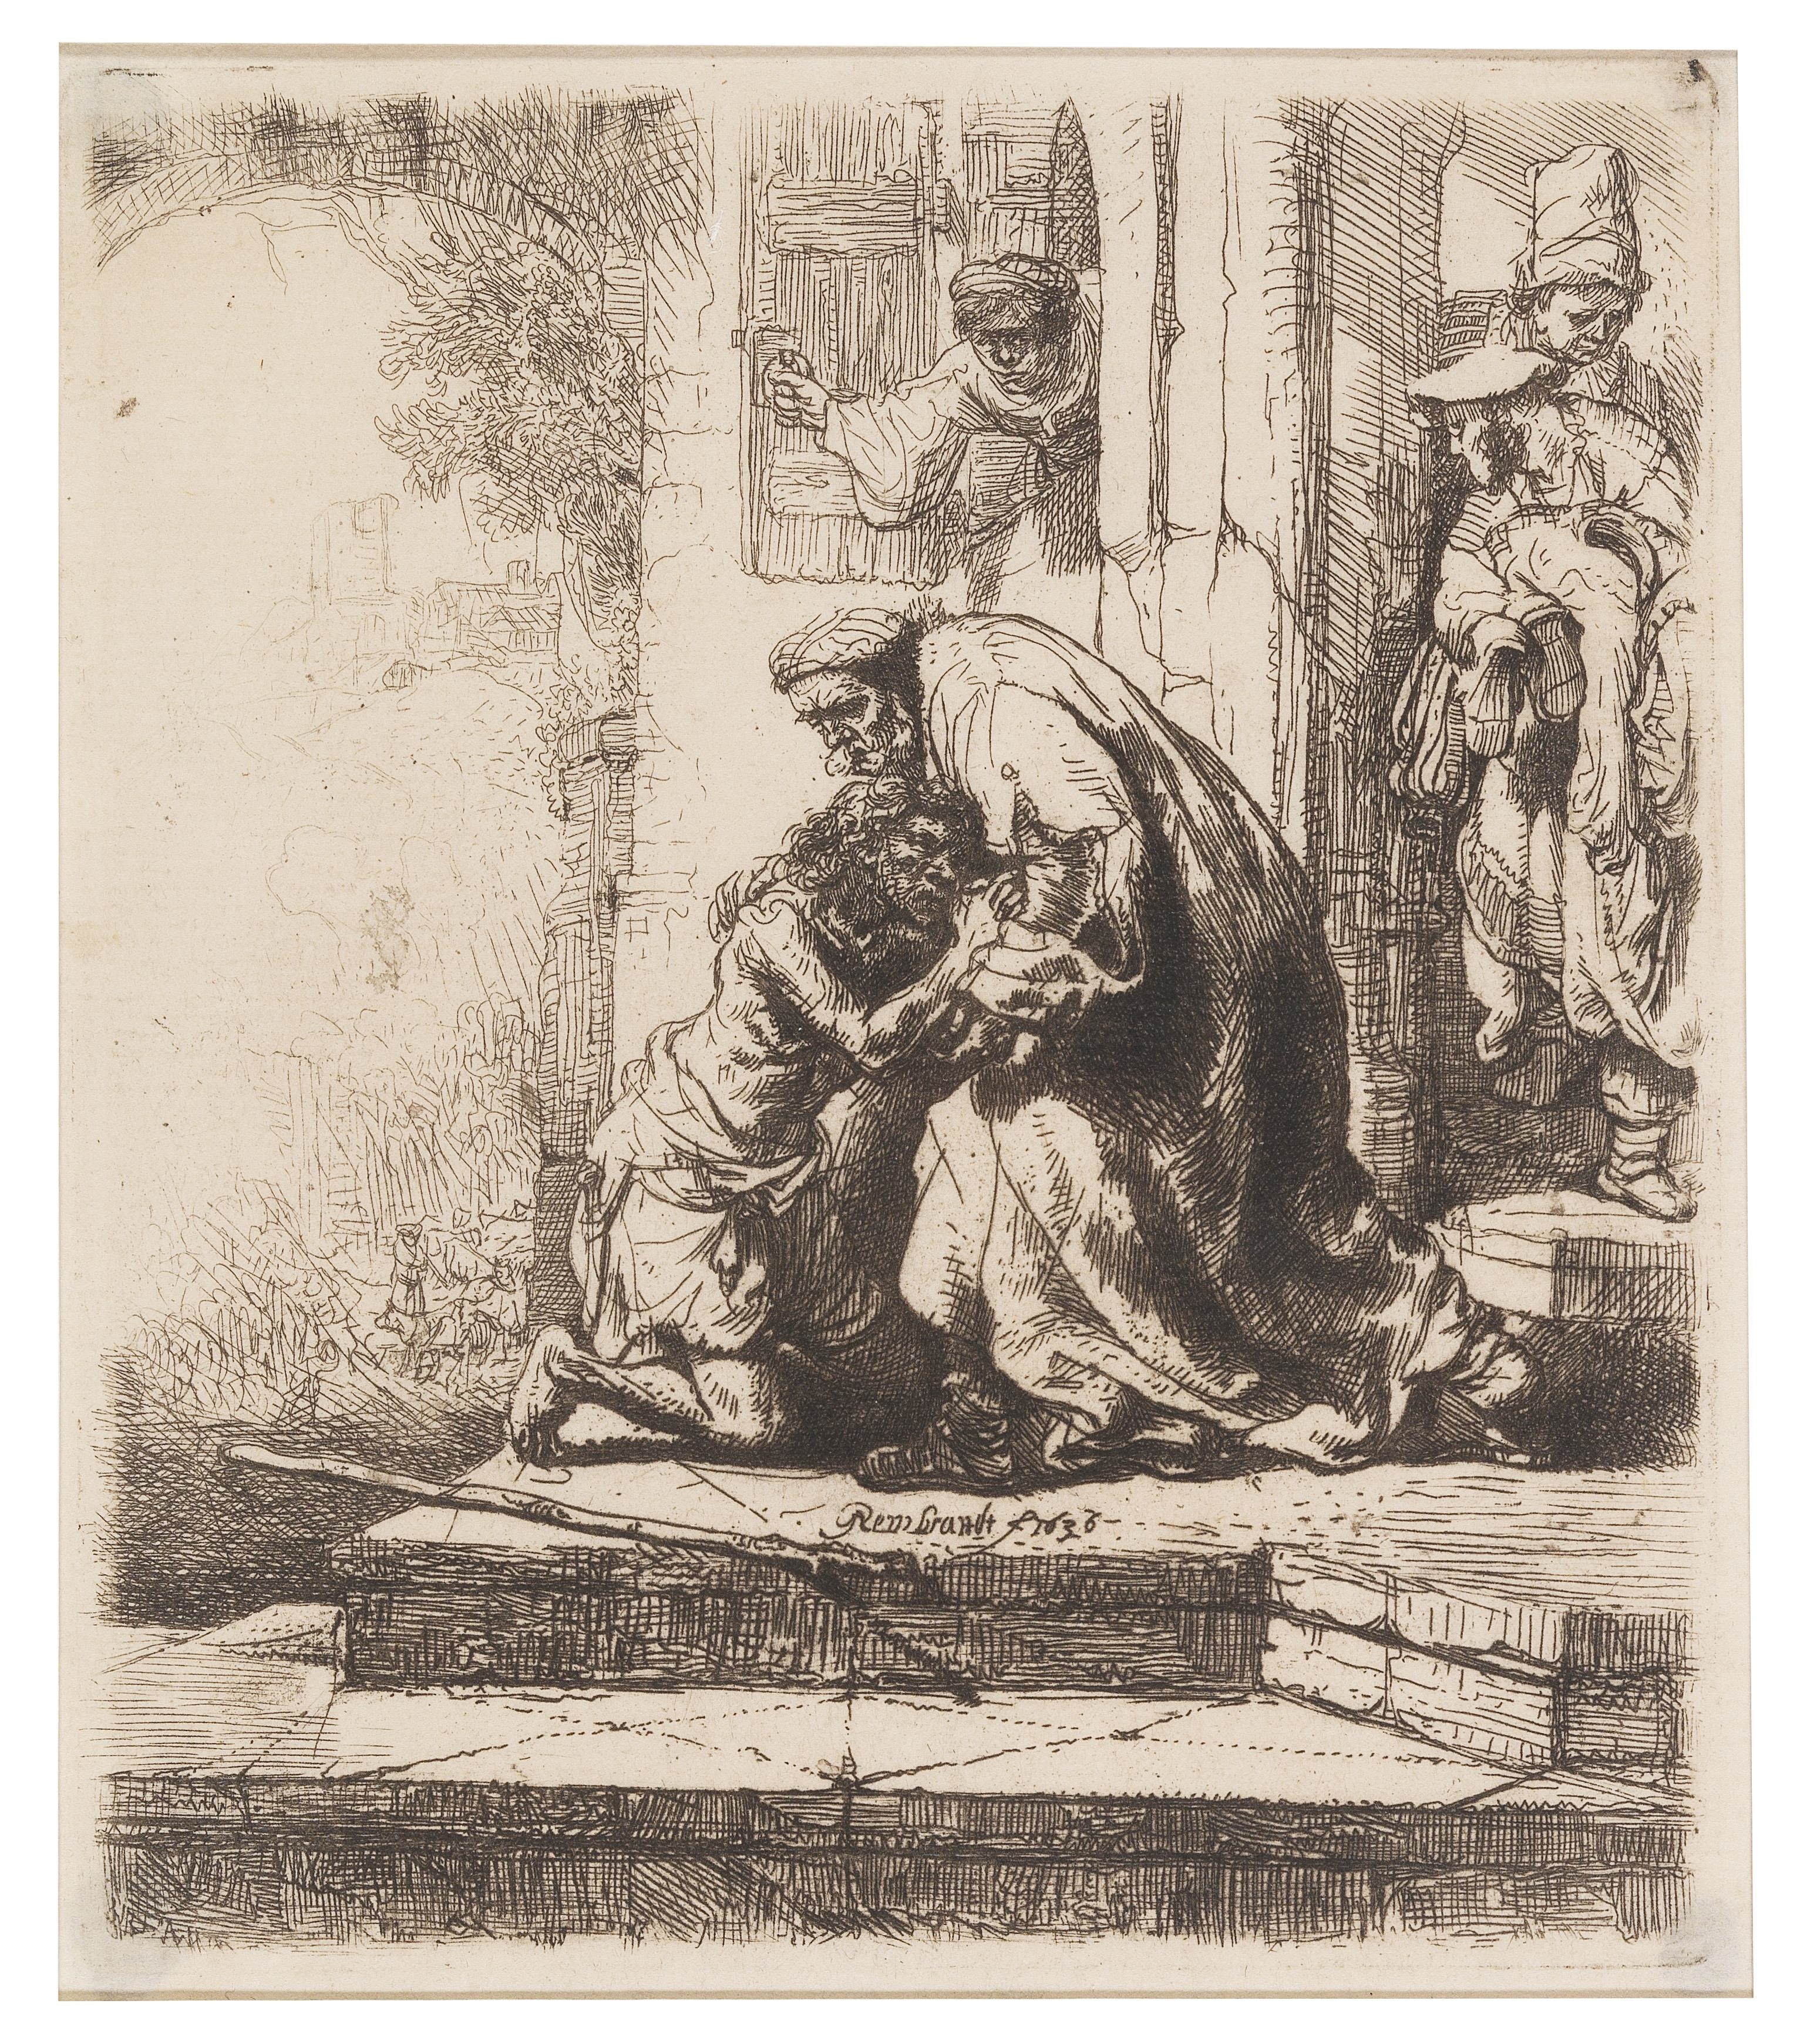 The Return of the Prodigal Son by Rembrandt van Rijn, 1636